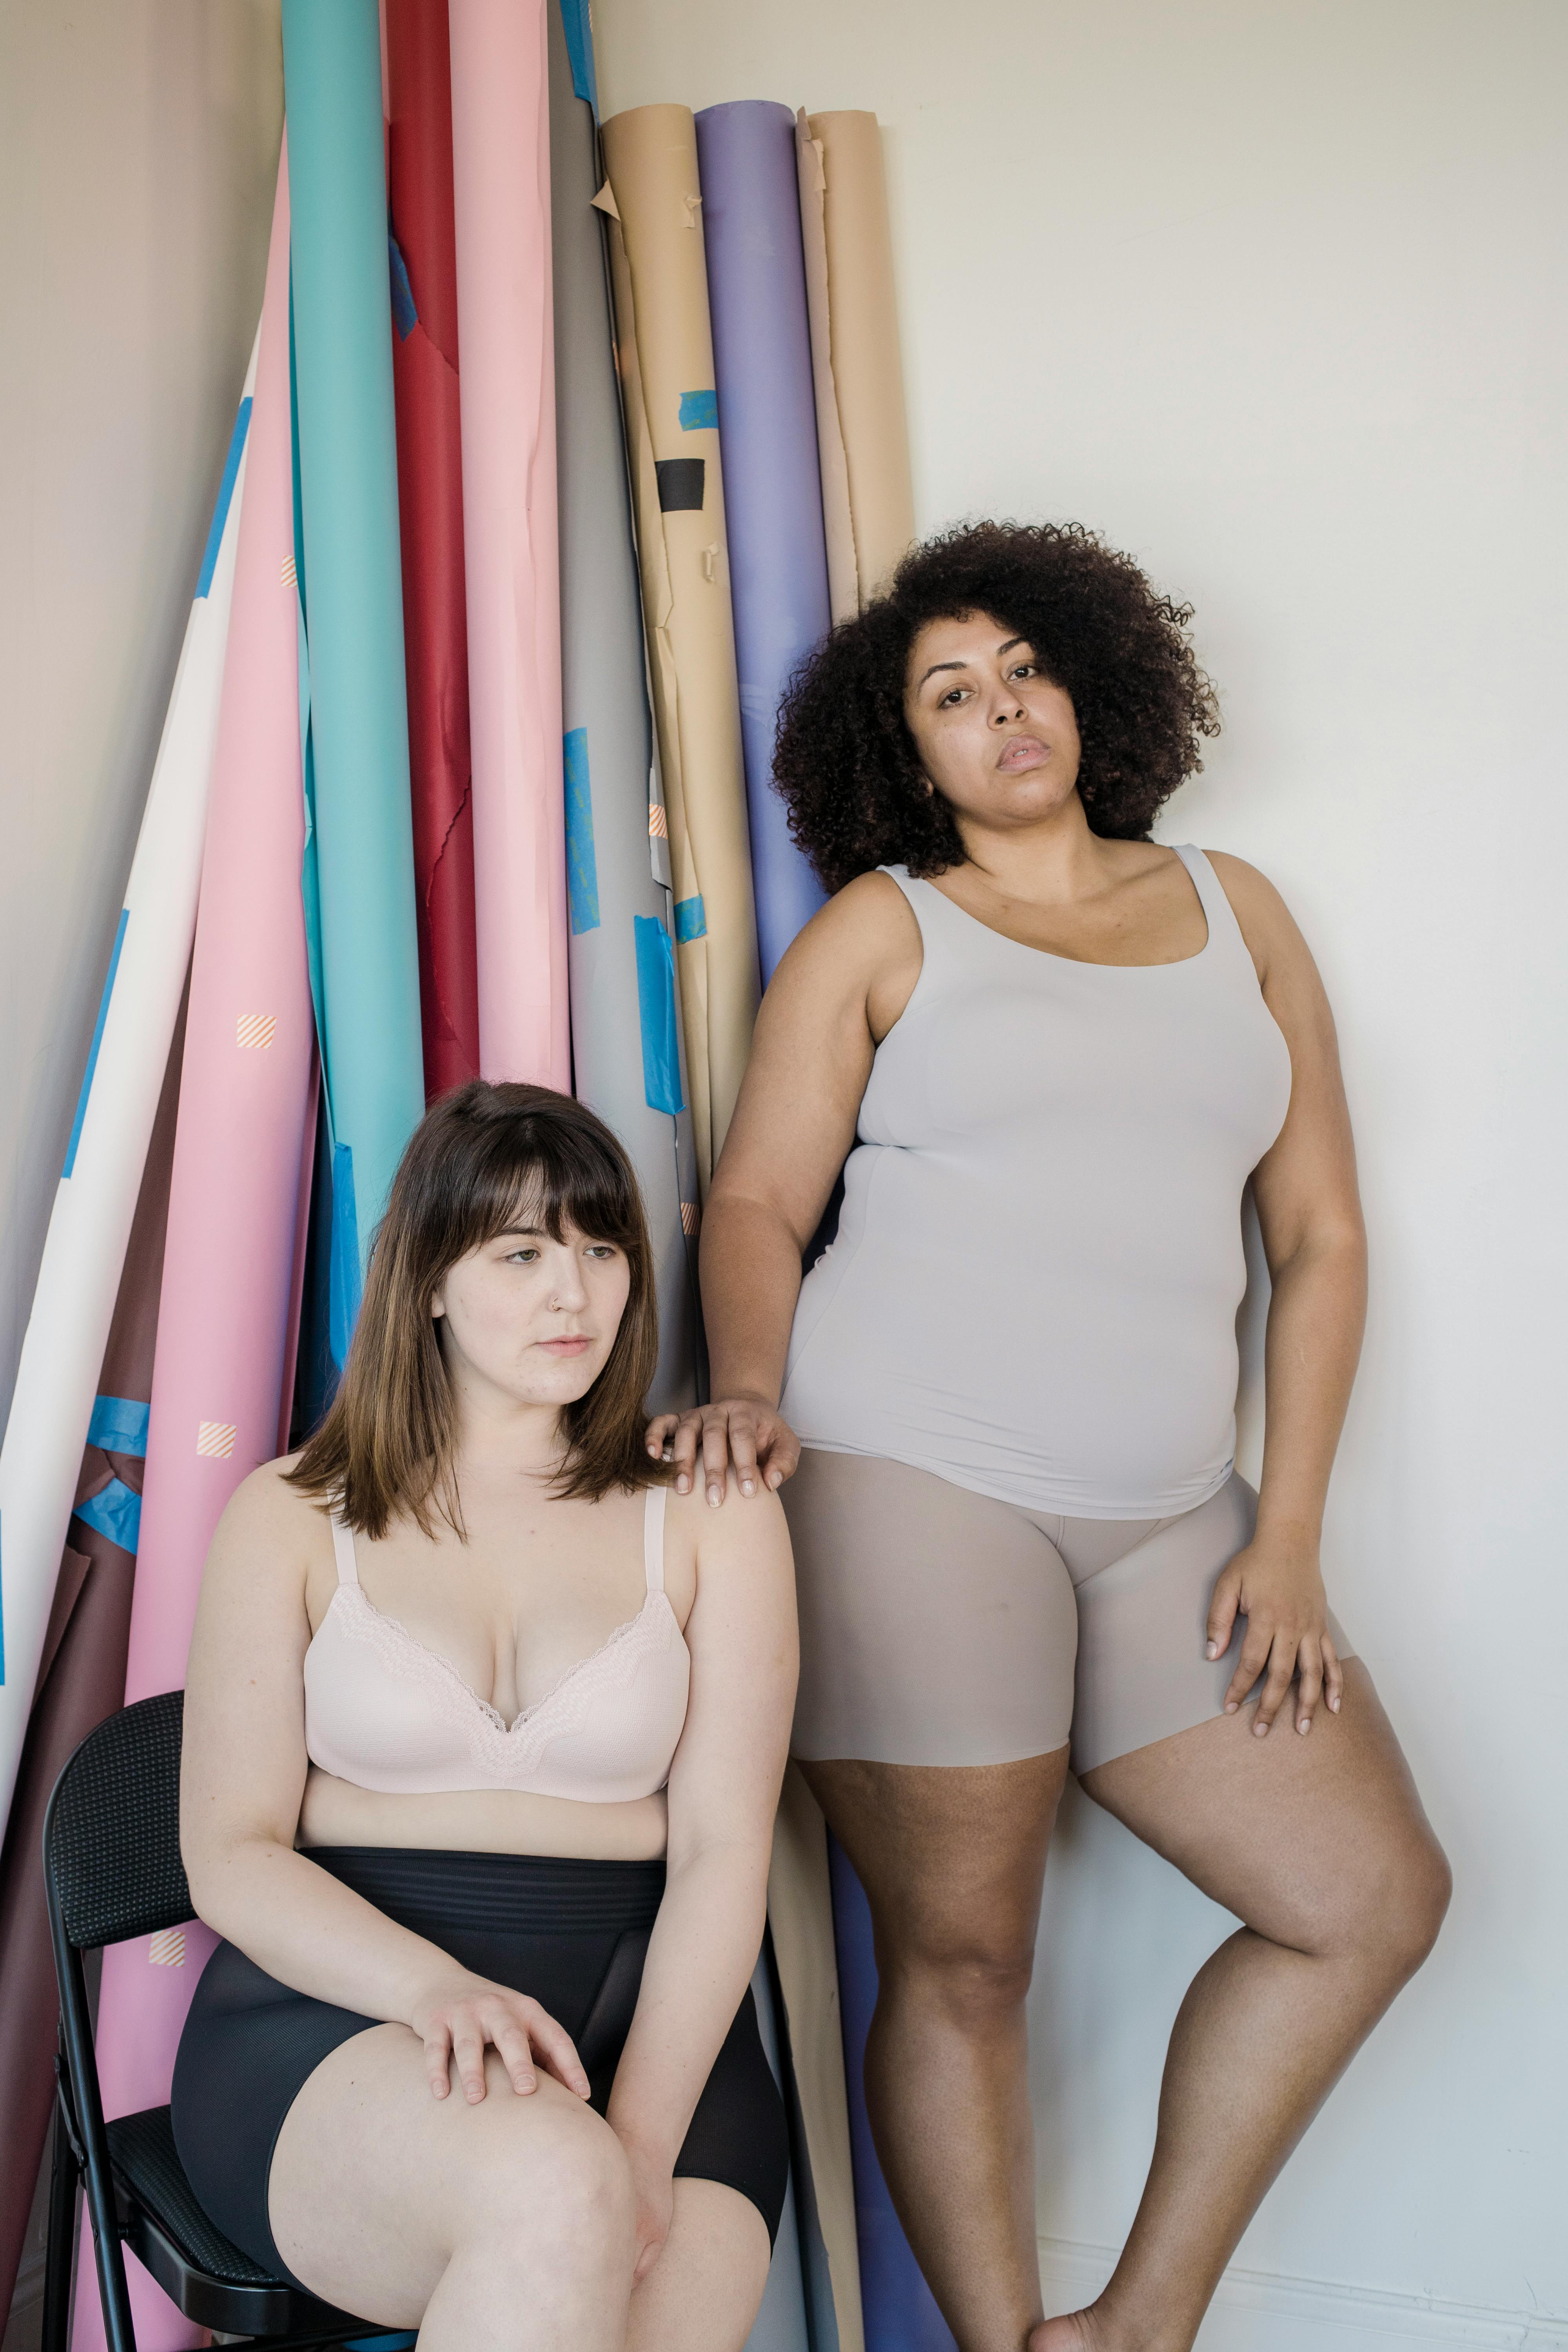 Overweight diverse girlfriends in underclothes against paper rolls · Free  Stock Photo